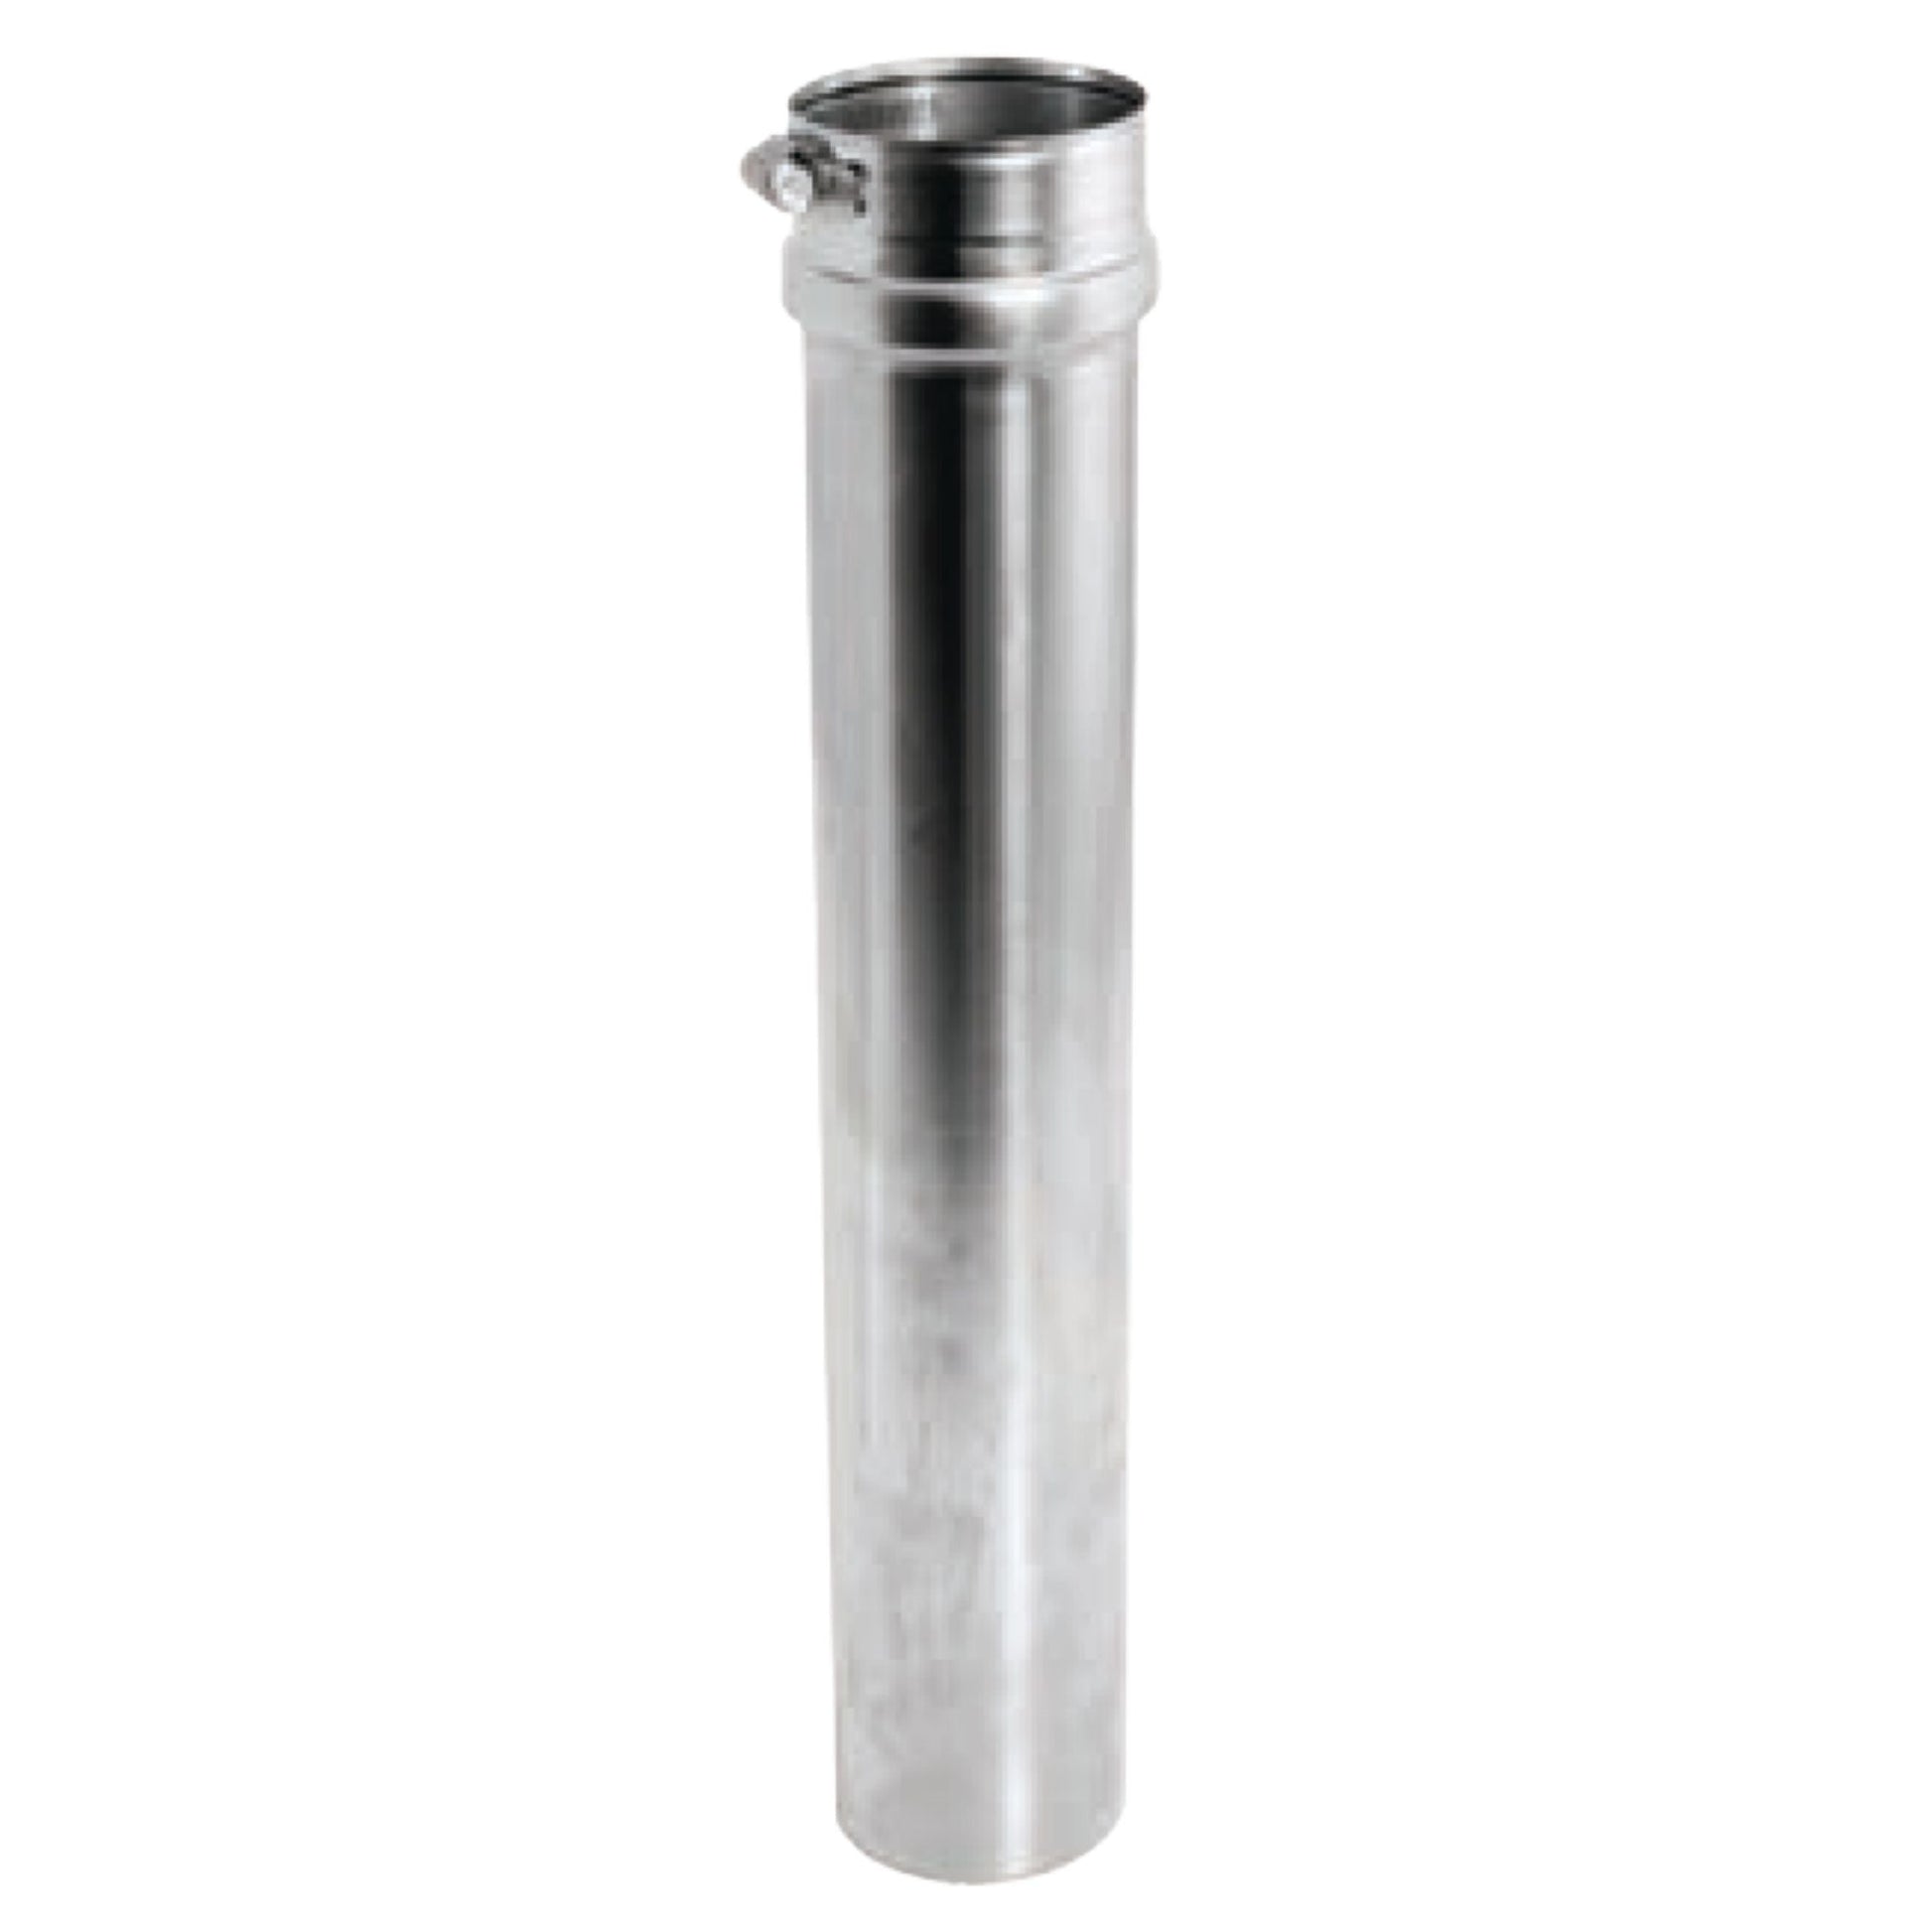 DuraVent FasNSeal 6" x 18" 29-4C Stainless Steel Adjustable Vent Length